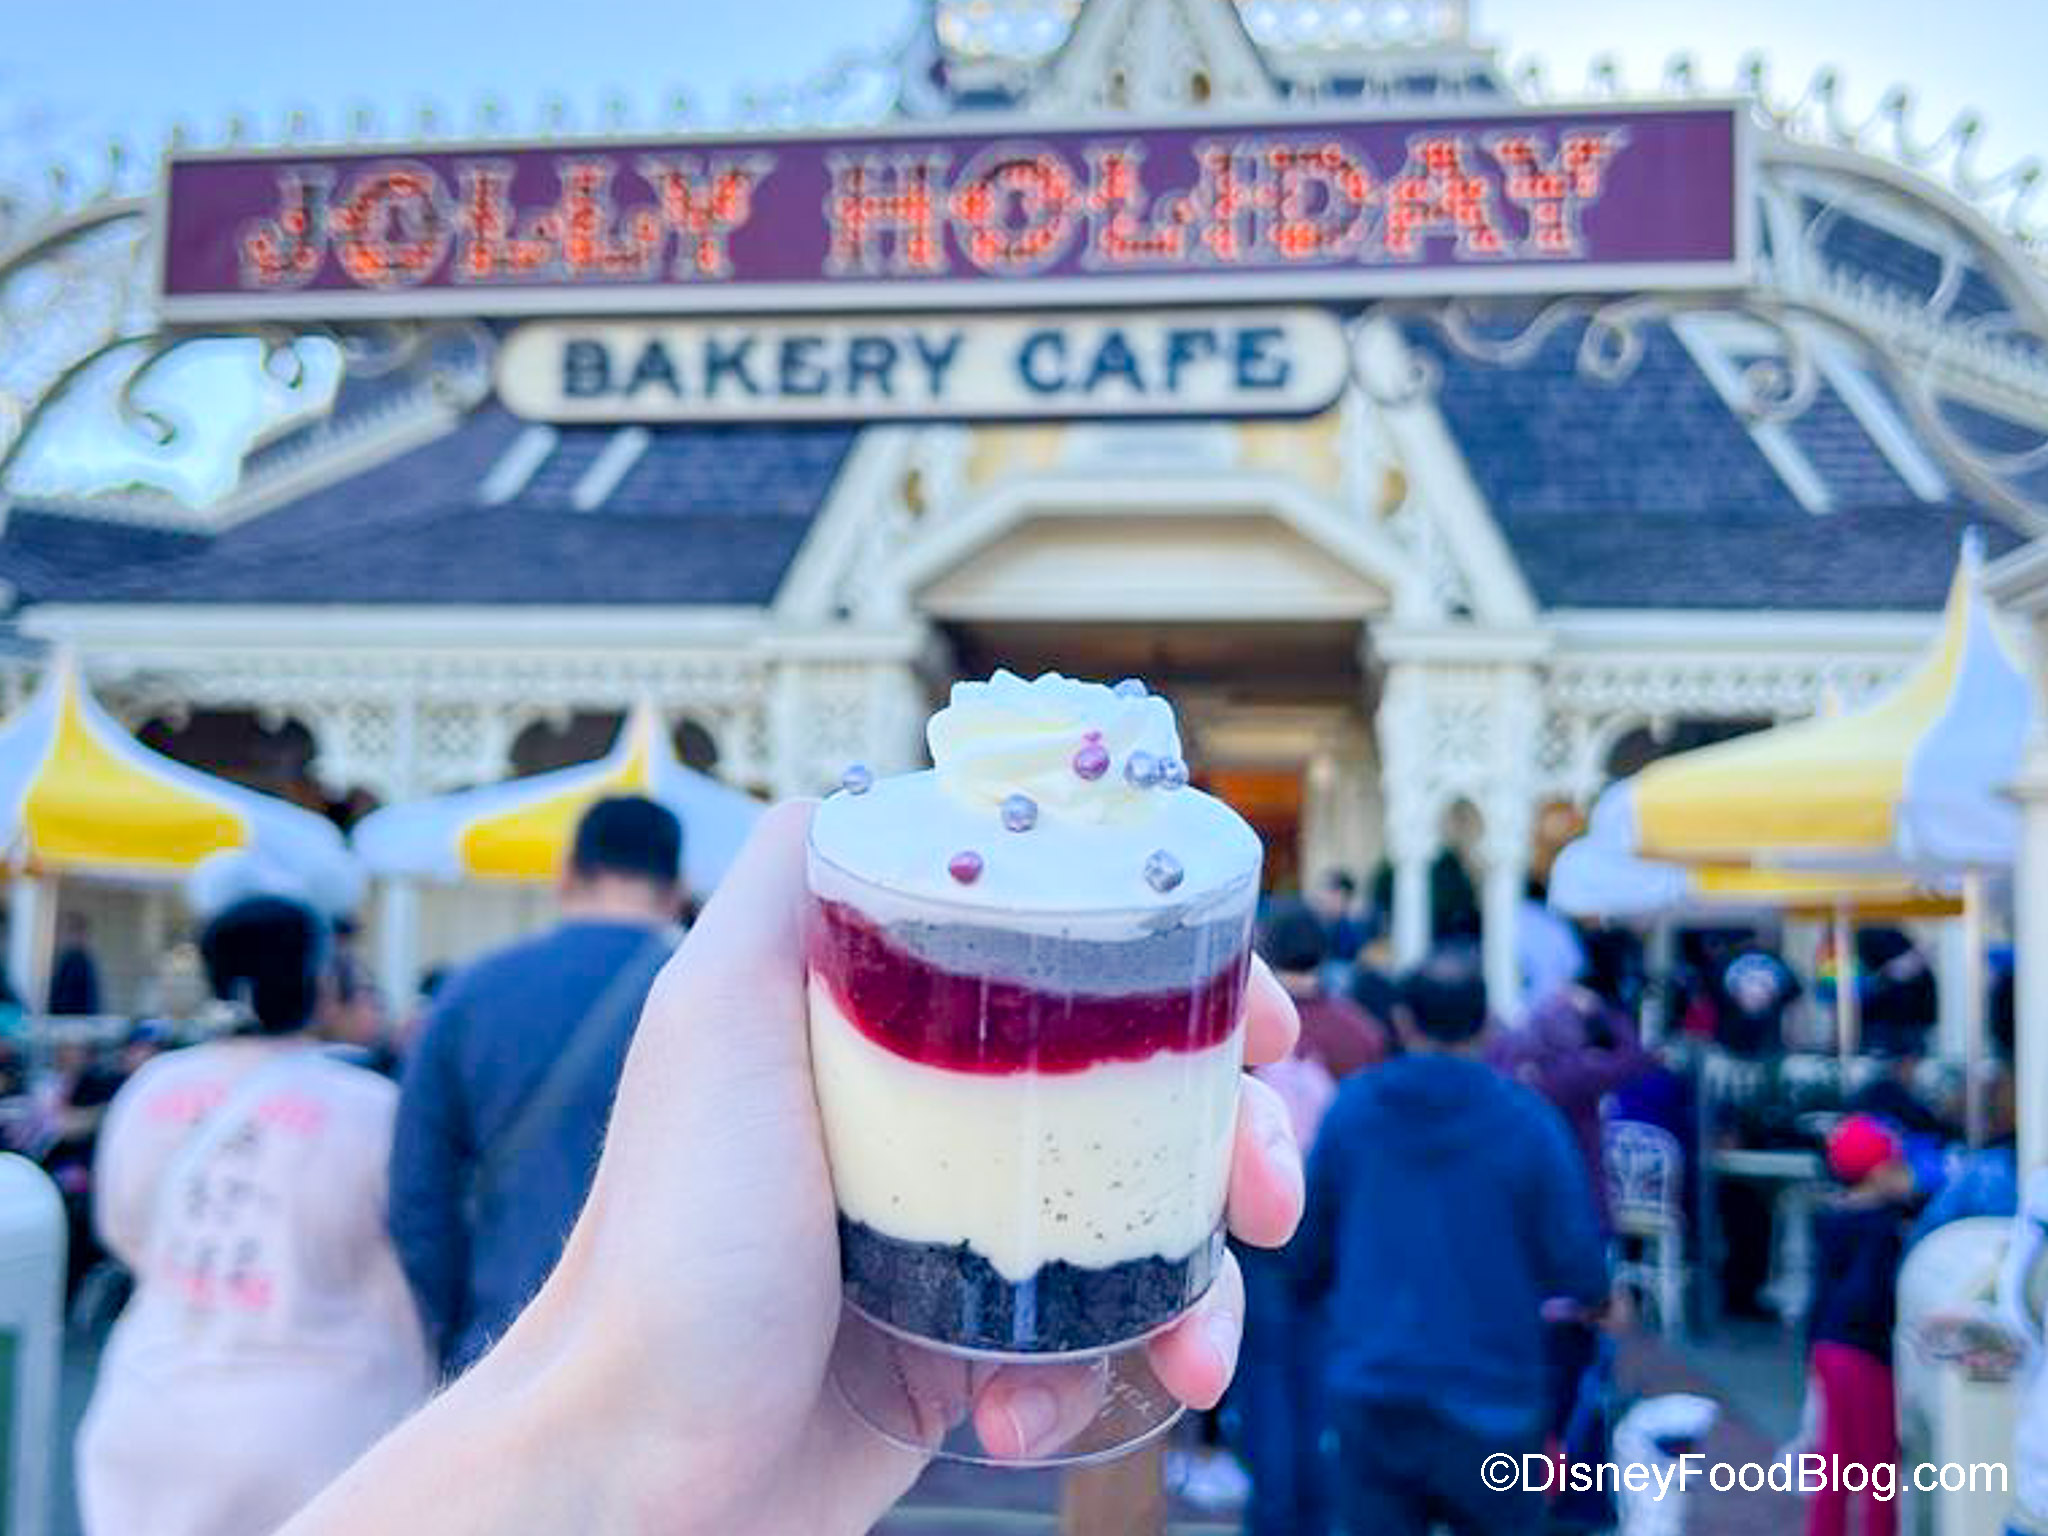 Disney Coffee: Where to Get Coffee at Disneyland - Lipgloss and Crayons